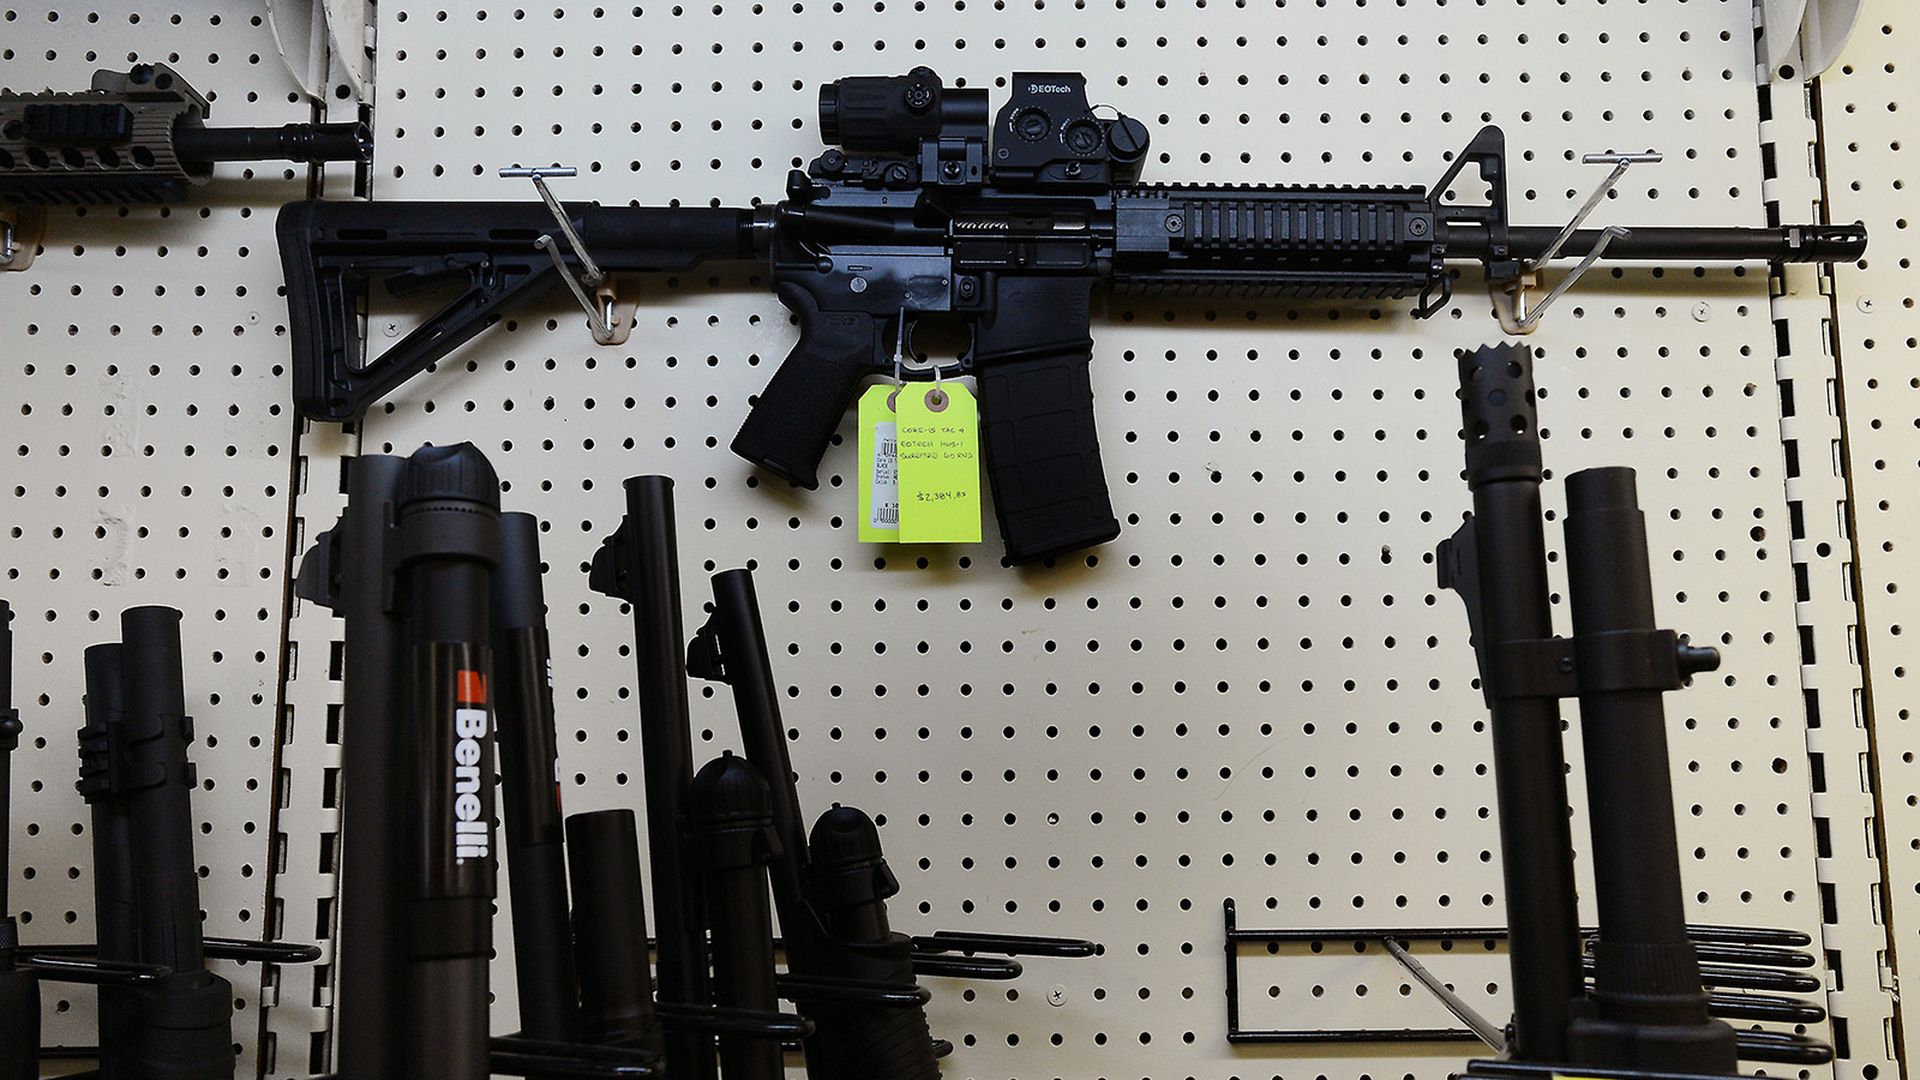 On display at a gun shop in Wendell, N.C., an AR-15 assault rifle.